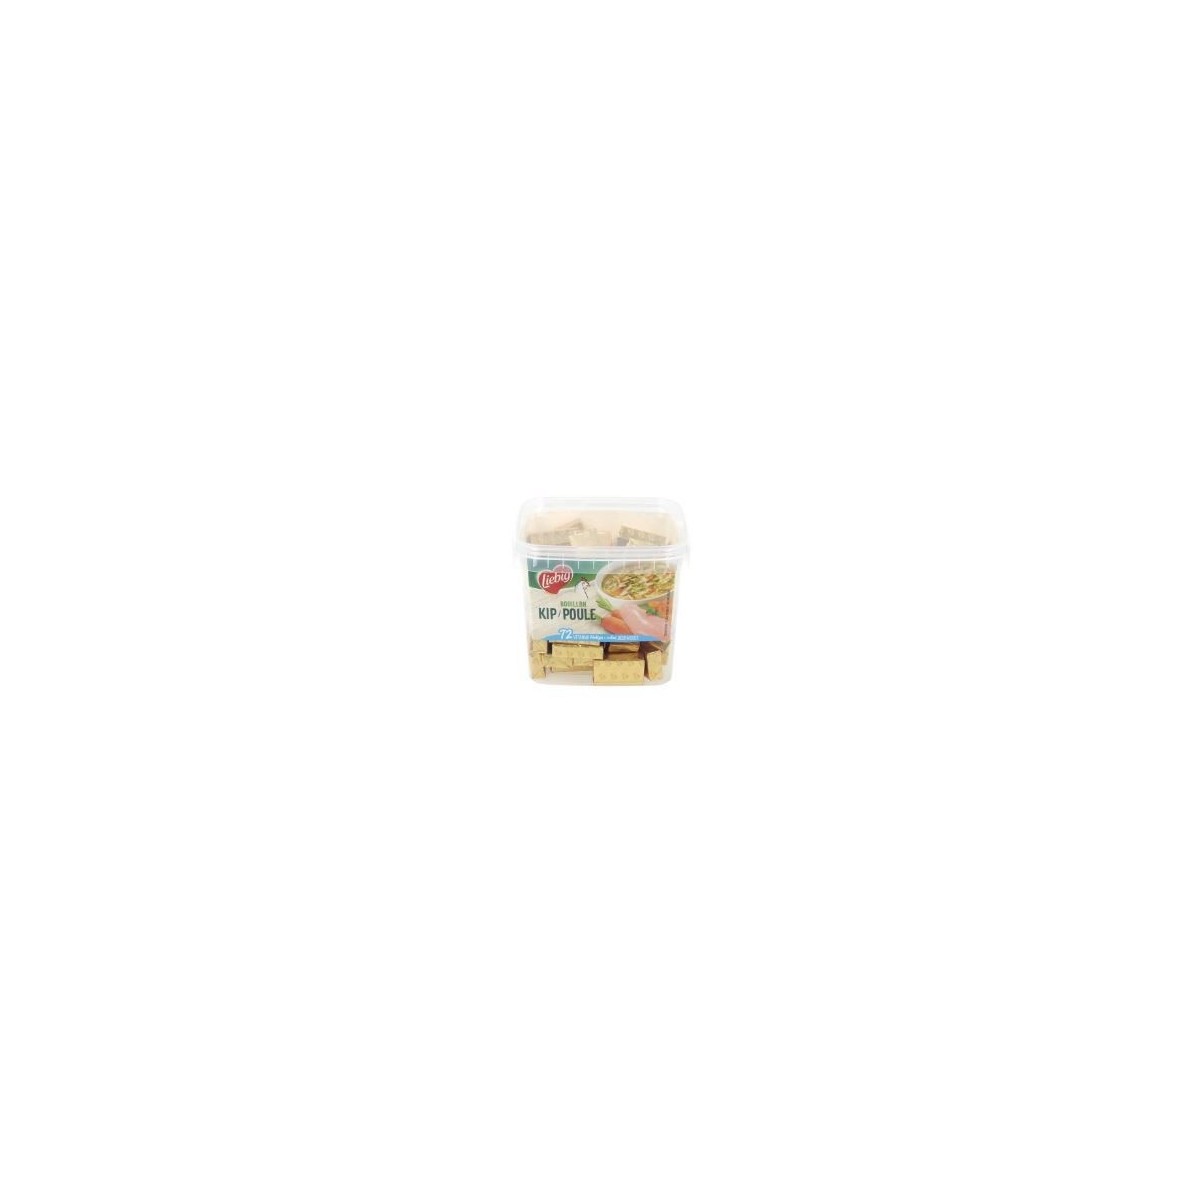 KNORR CHICKEN STOCK CUBE 66 TABLETS  BOX